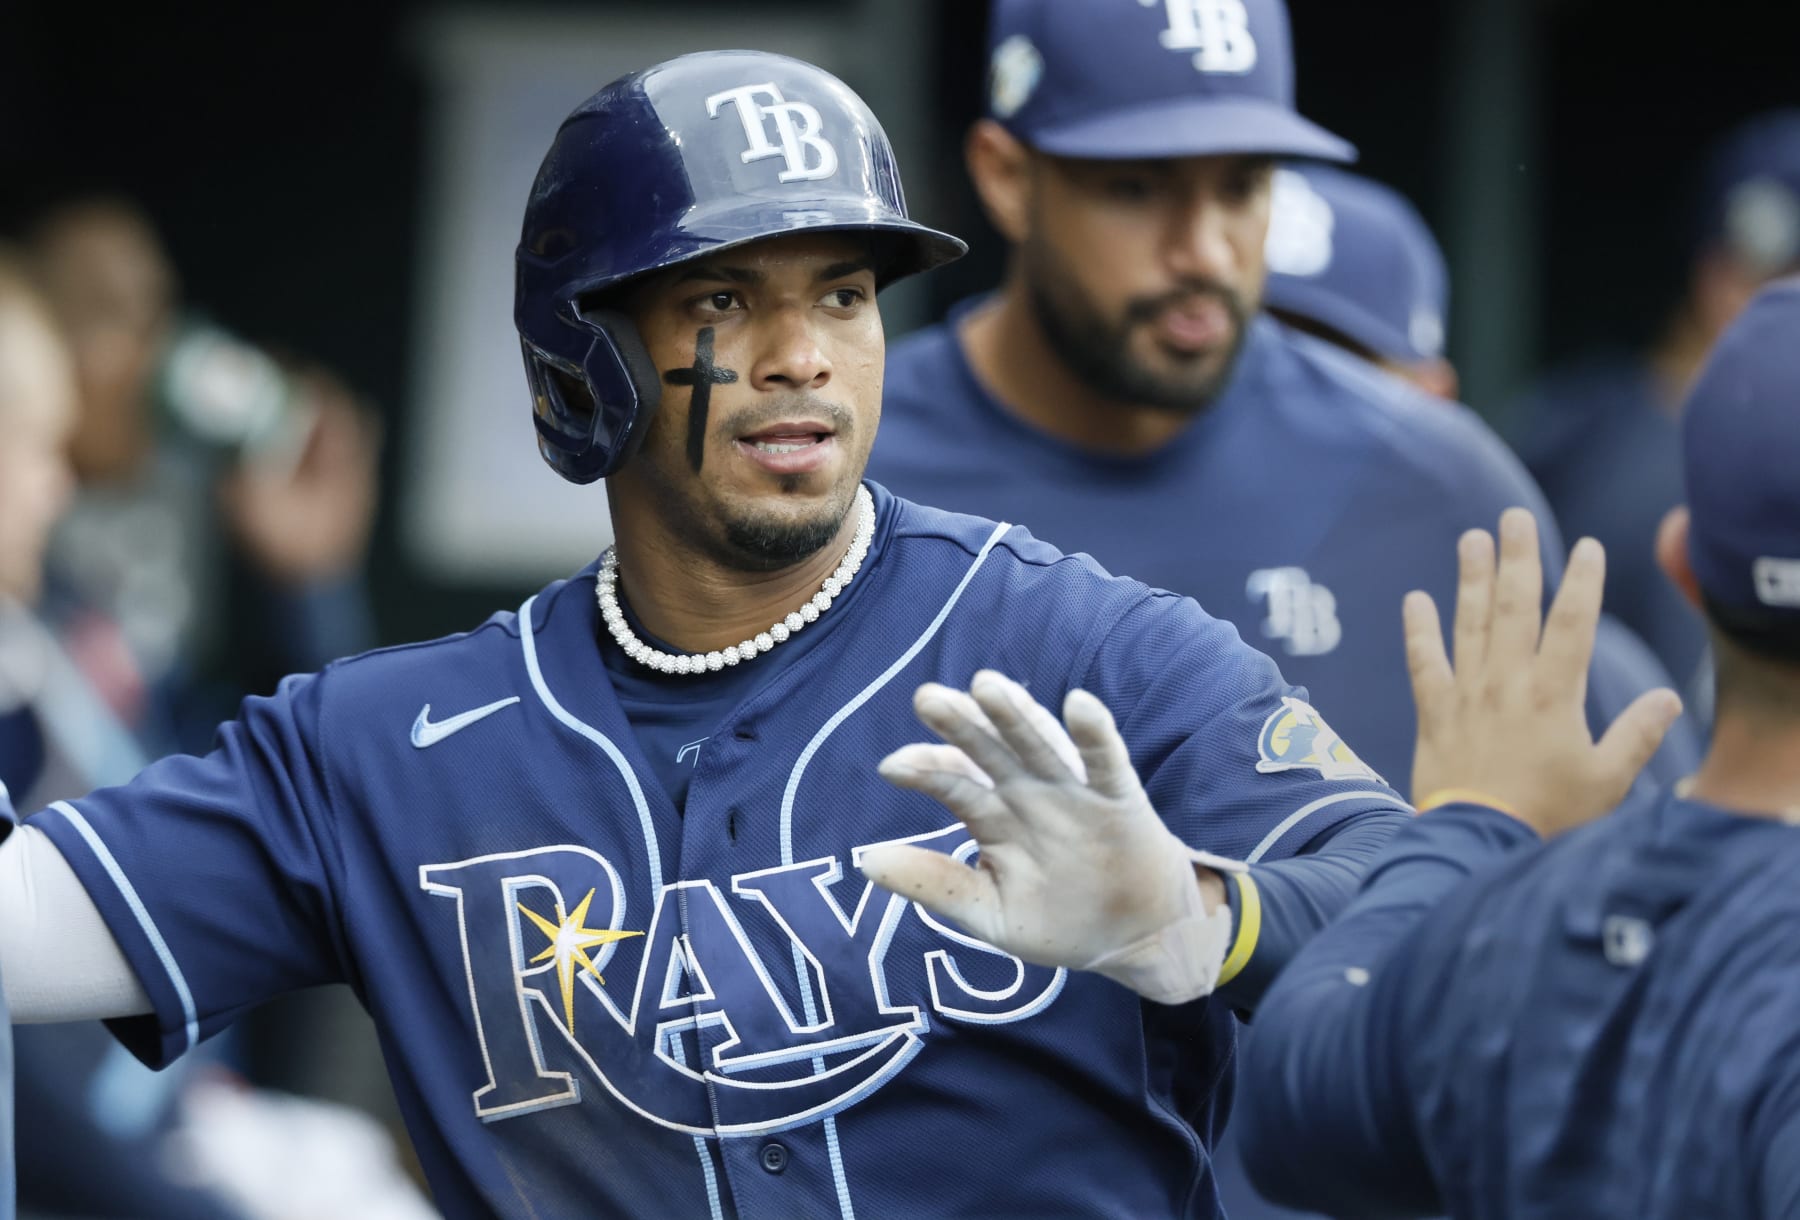 Dominican authorities investigate Rays' Wander Franco for an alleged  relationship with a minor